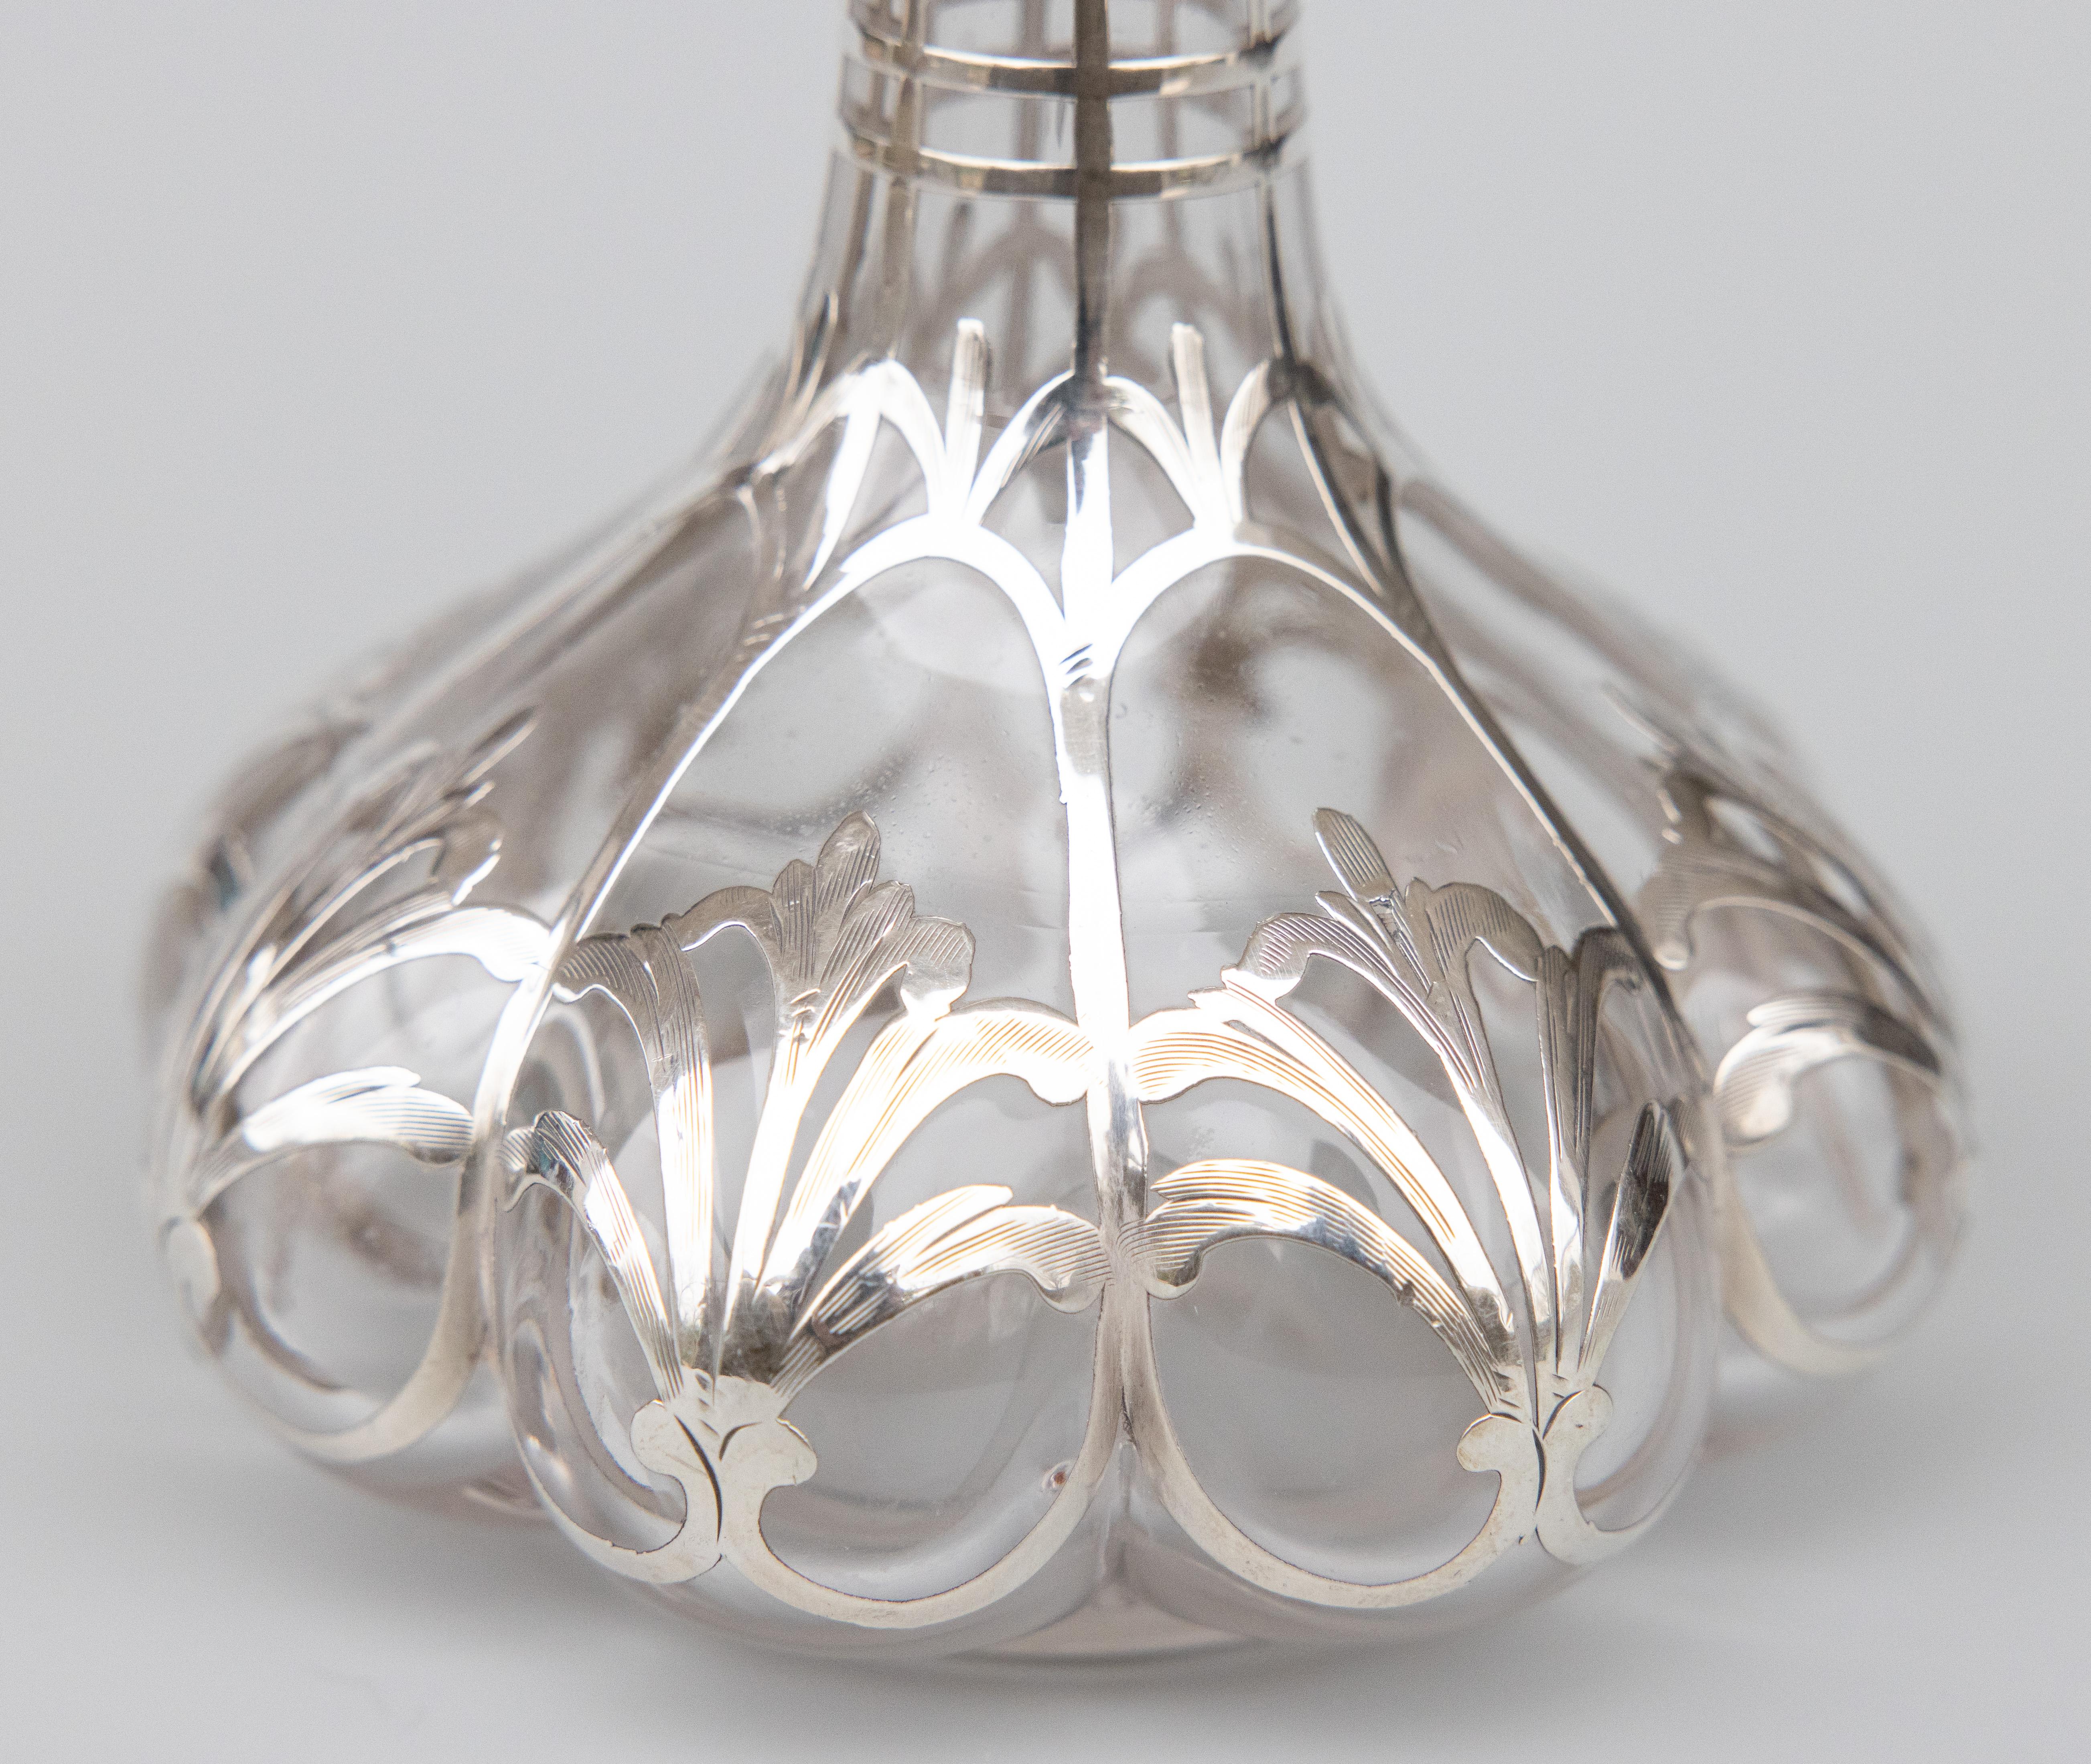 Early 20th Century Art Nouveau French Silver Overlay Glass Perfume Bottle, circa 1900 For Sale